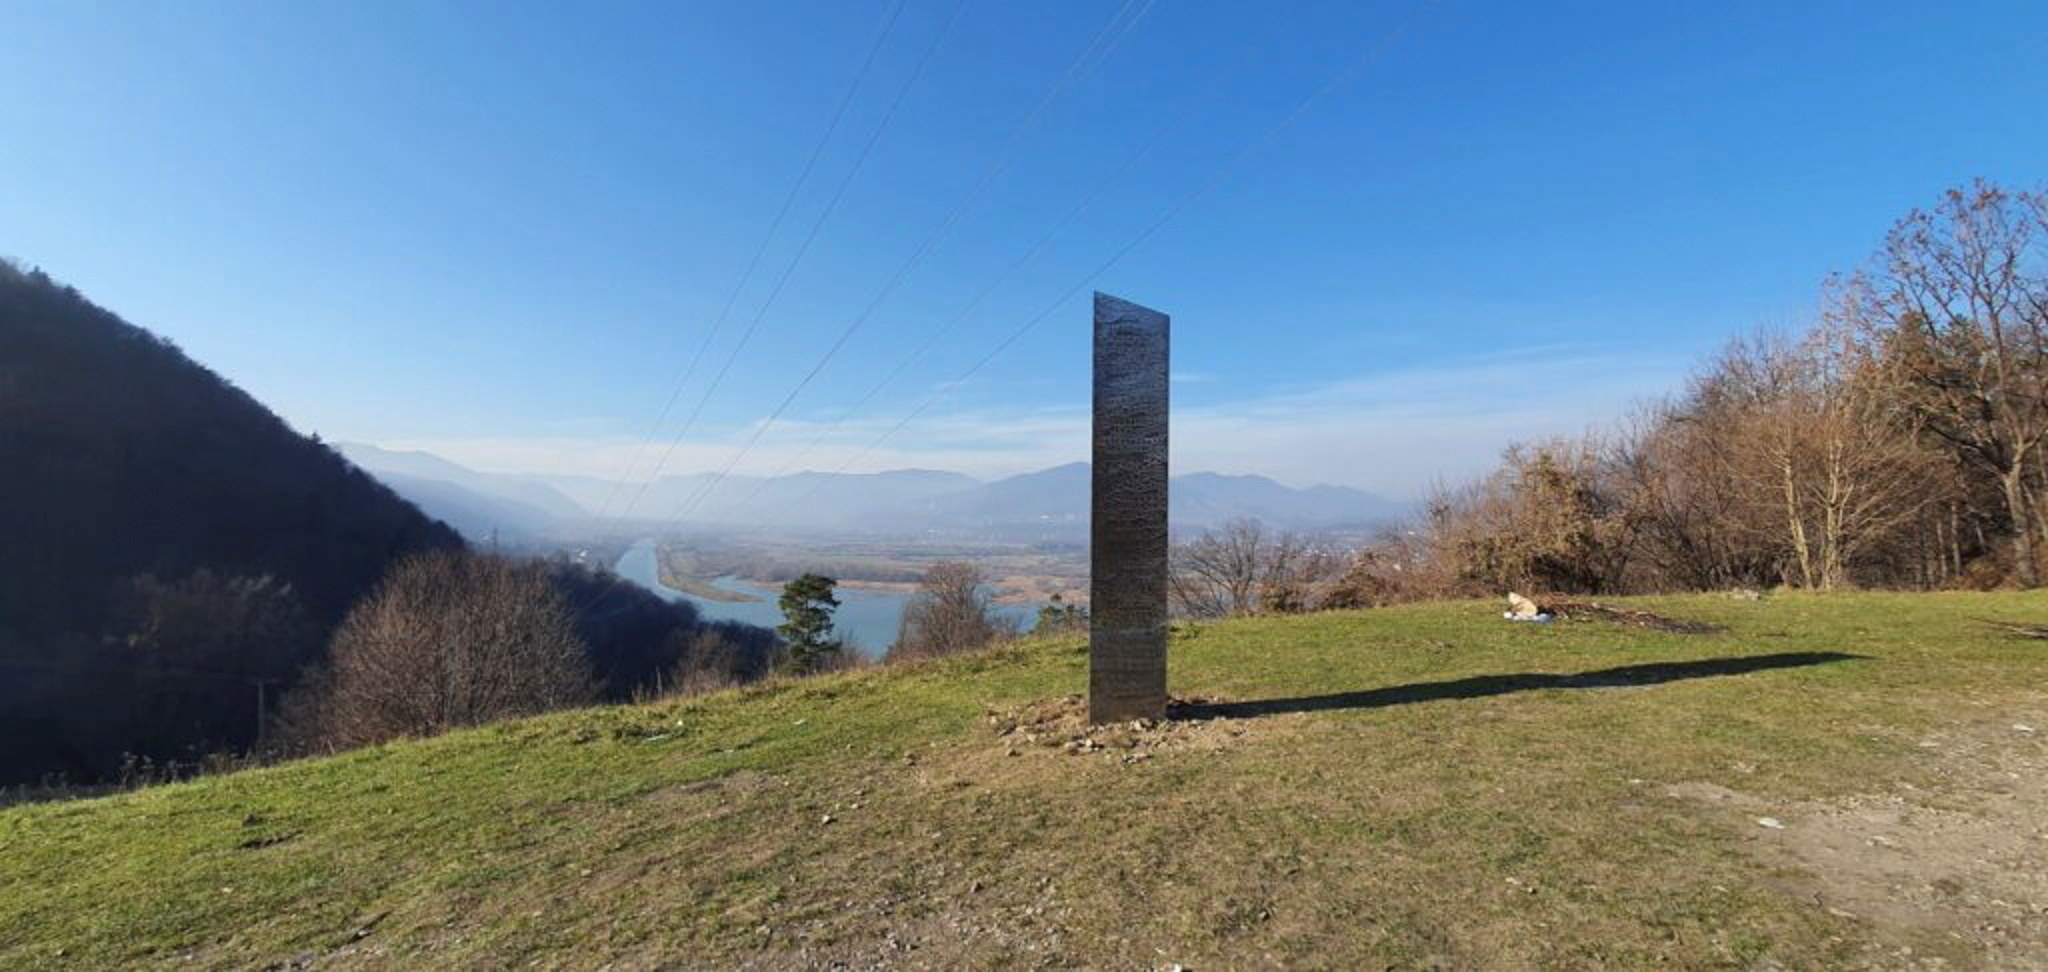 A chrome monolith on top of a hill